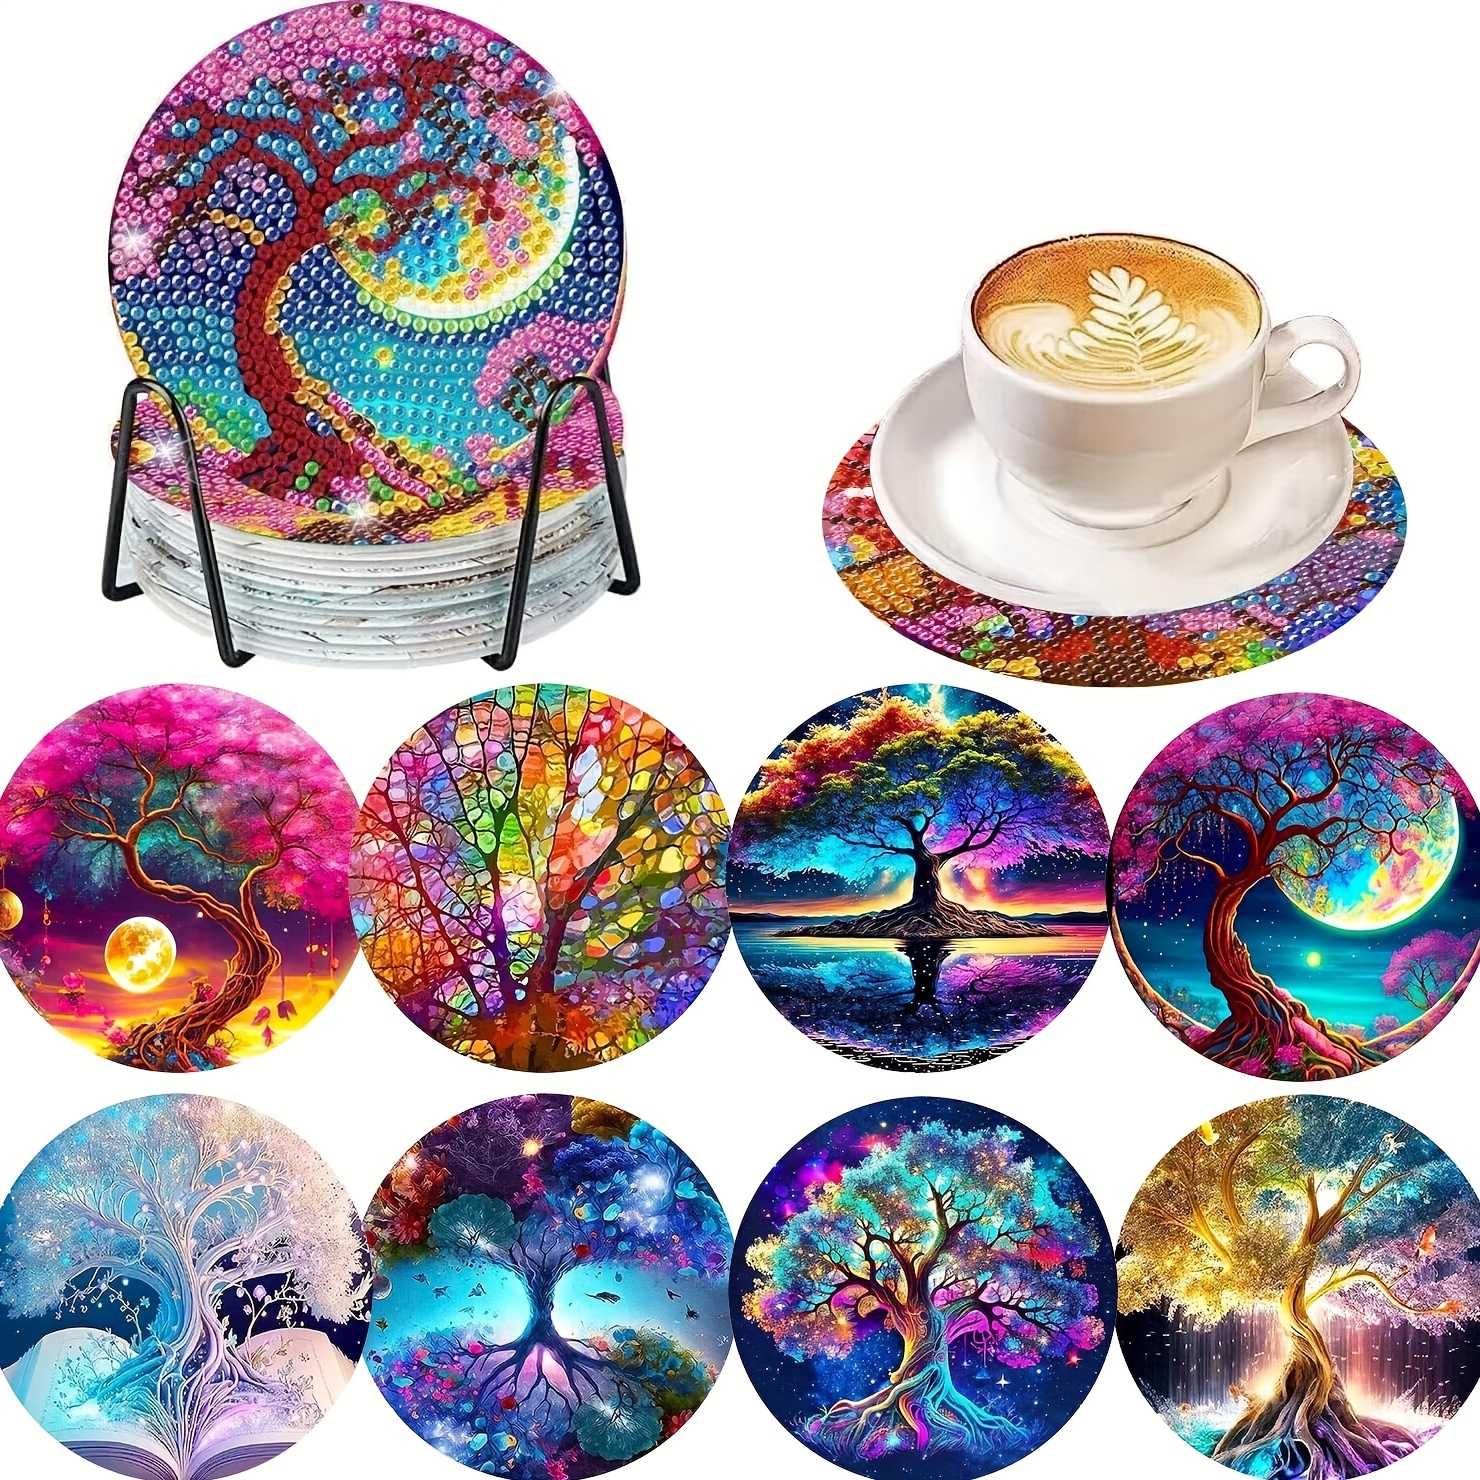 10 Pieces Diamond Painting Coasters Kit Holder Cork Pads, Skull Pattern Diamond Painting Coaster, DIY Diamond Painting Kits, for Gift Adults & Kids